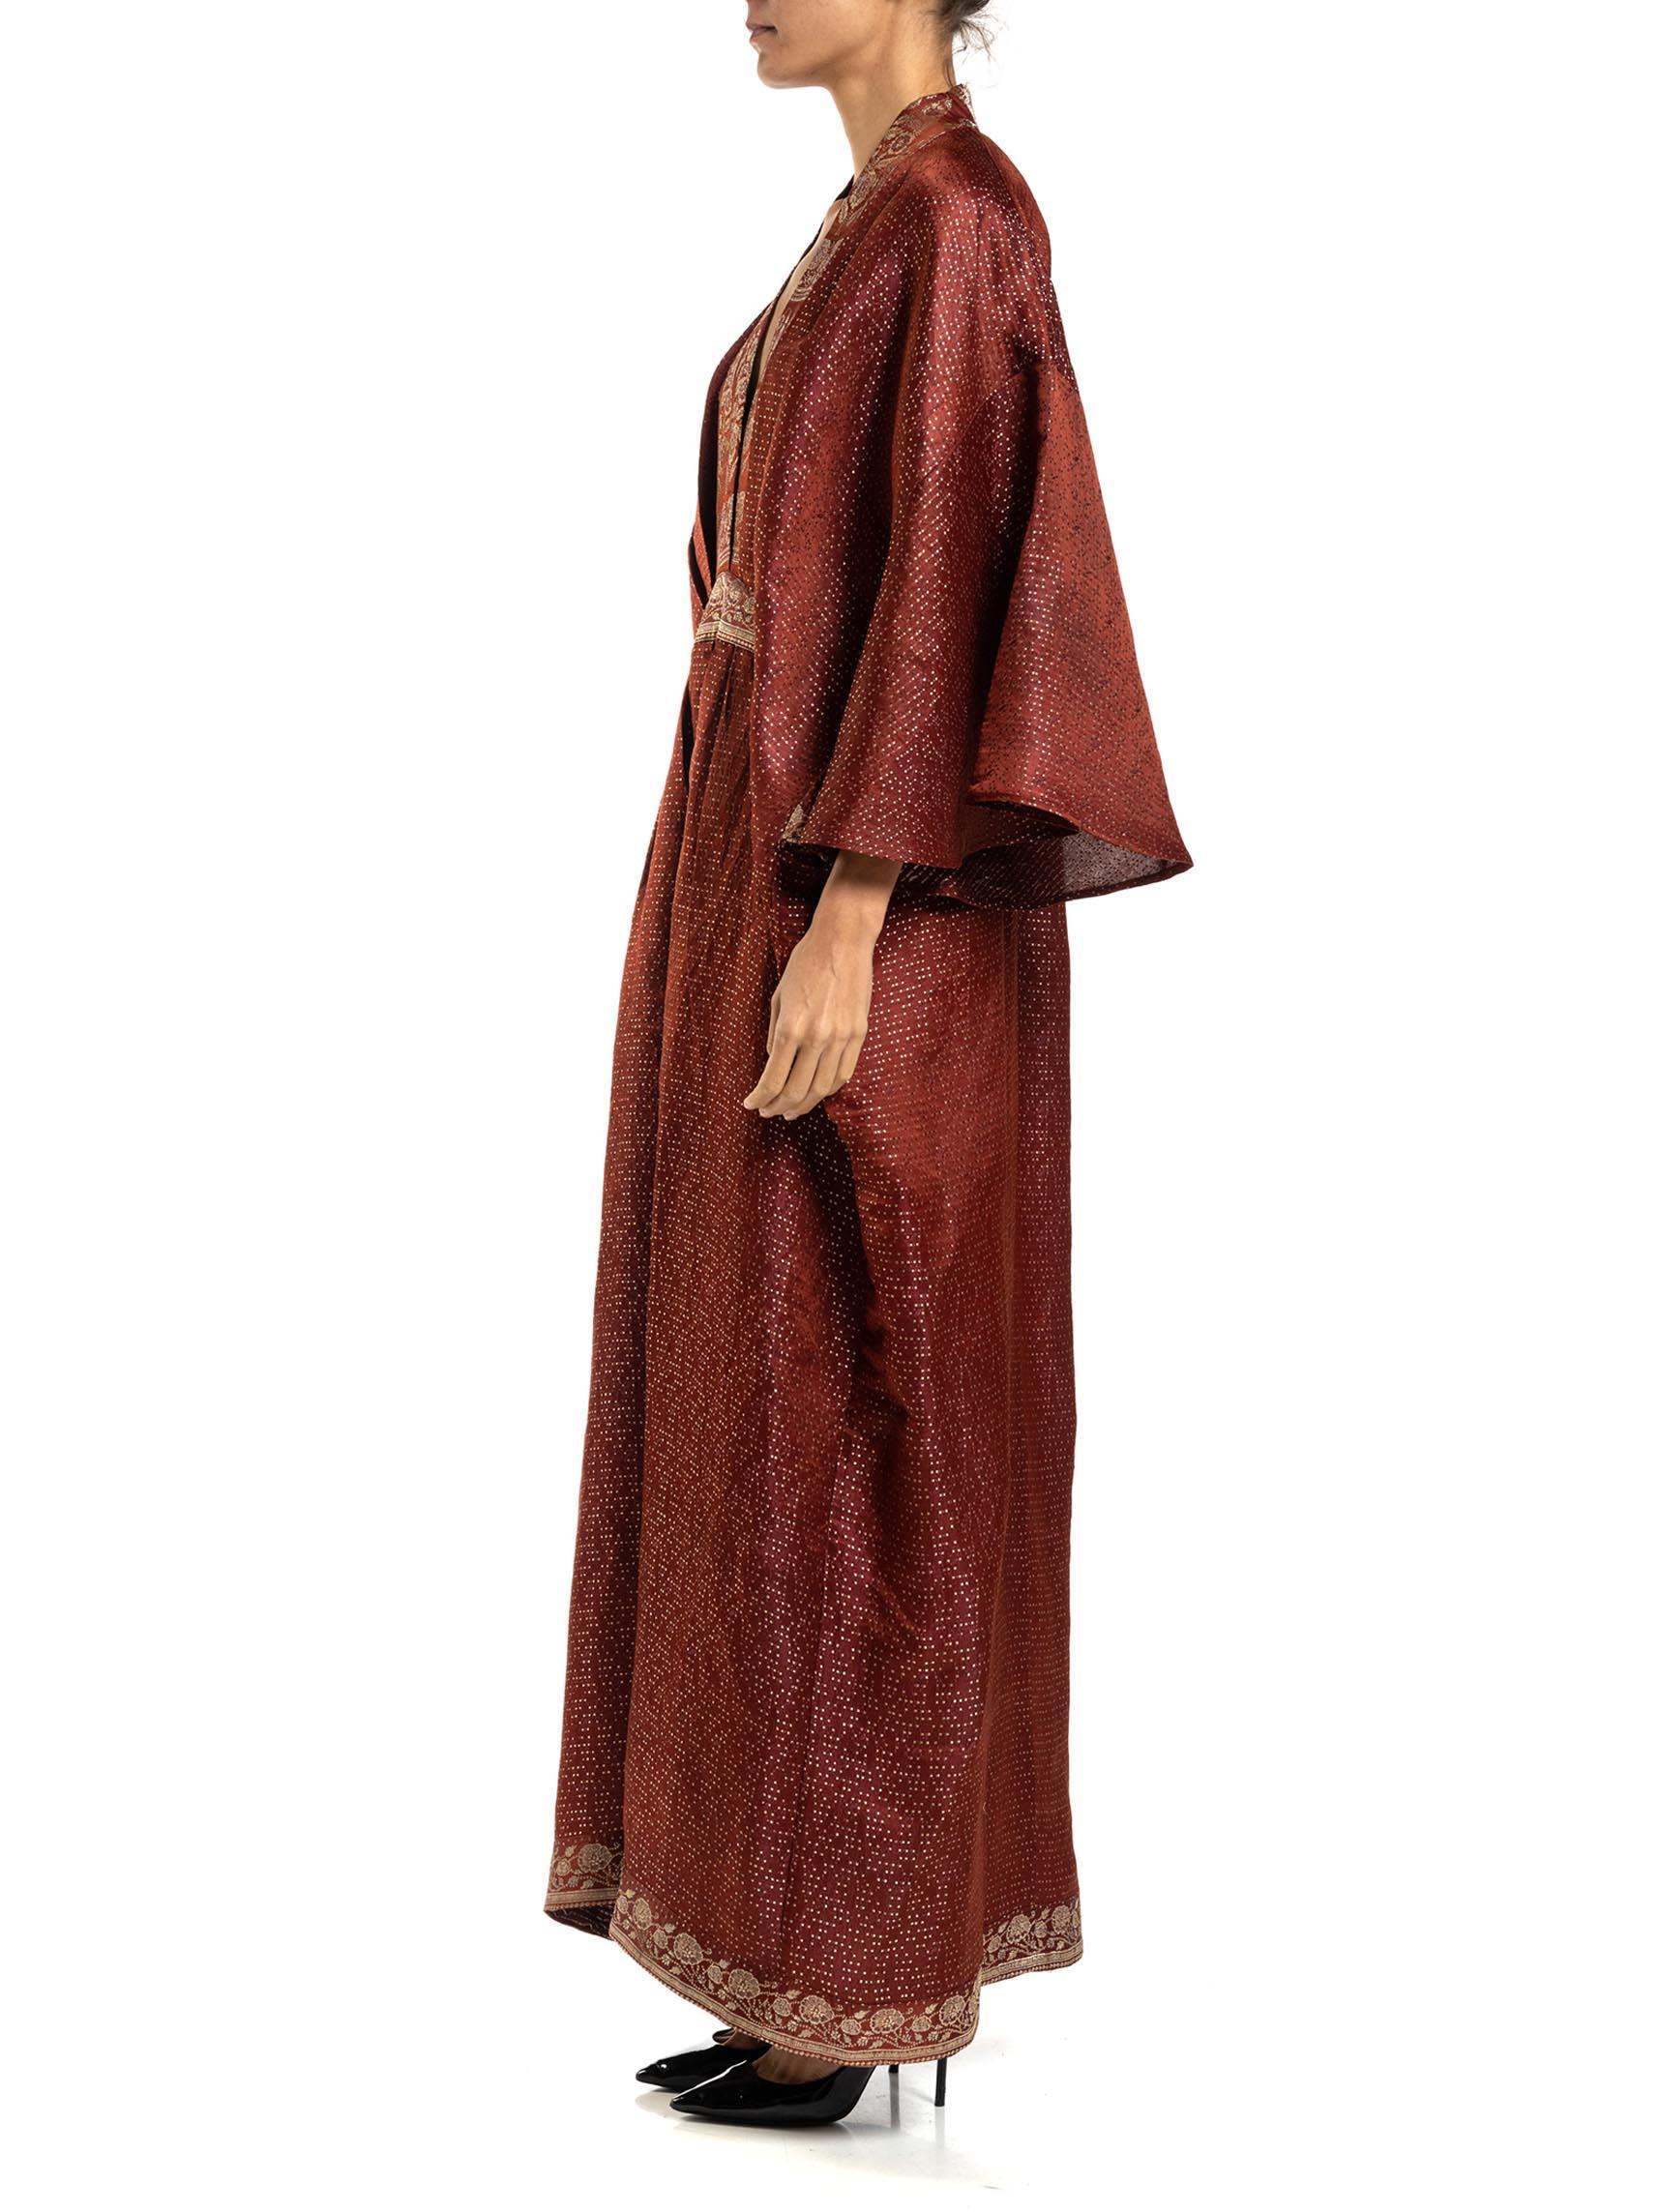 MORPHEW COLLECTION Burgundy Floral Silk Checkered Kaftan Made From Vintage Sari In Excellent Condition For Sale In New York, NY